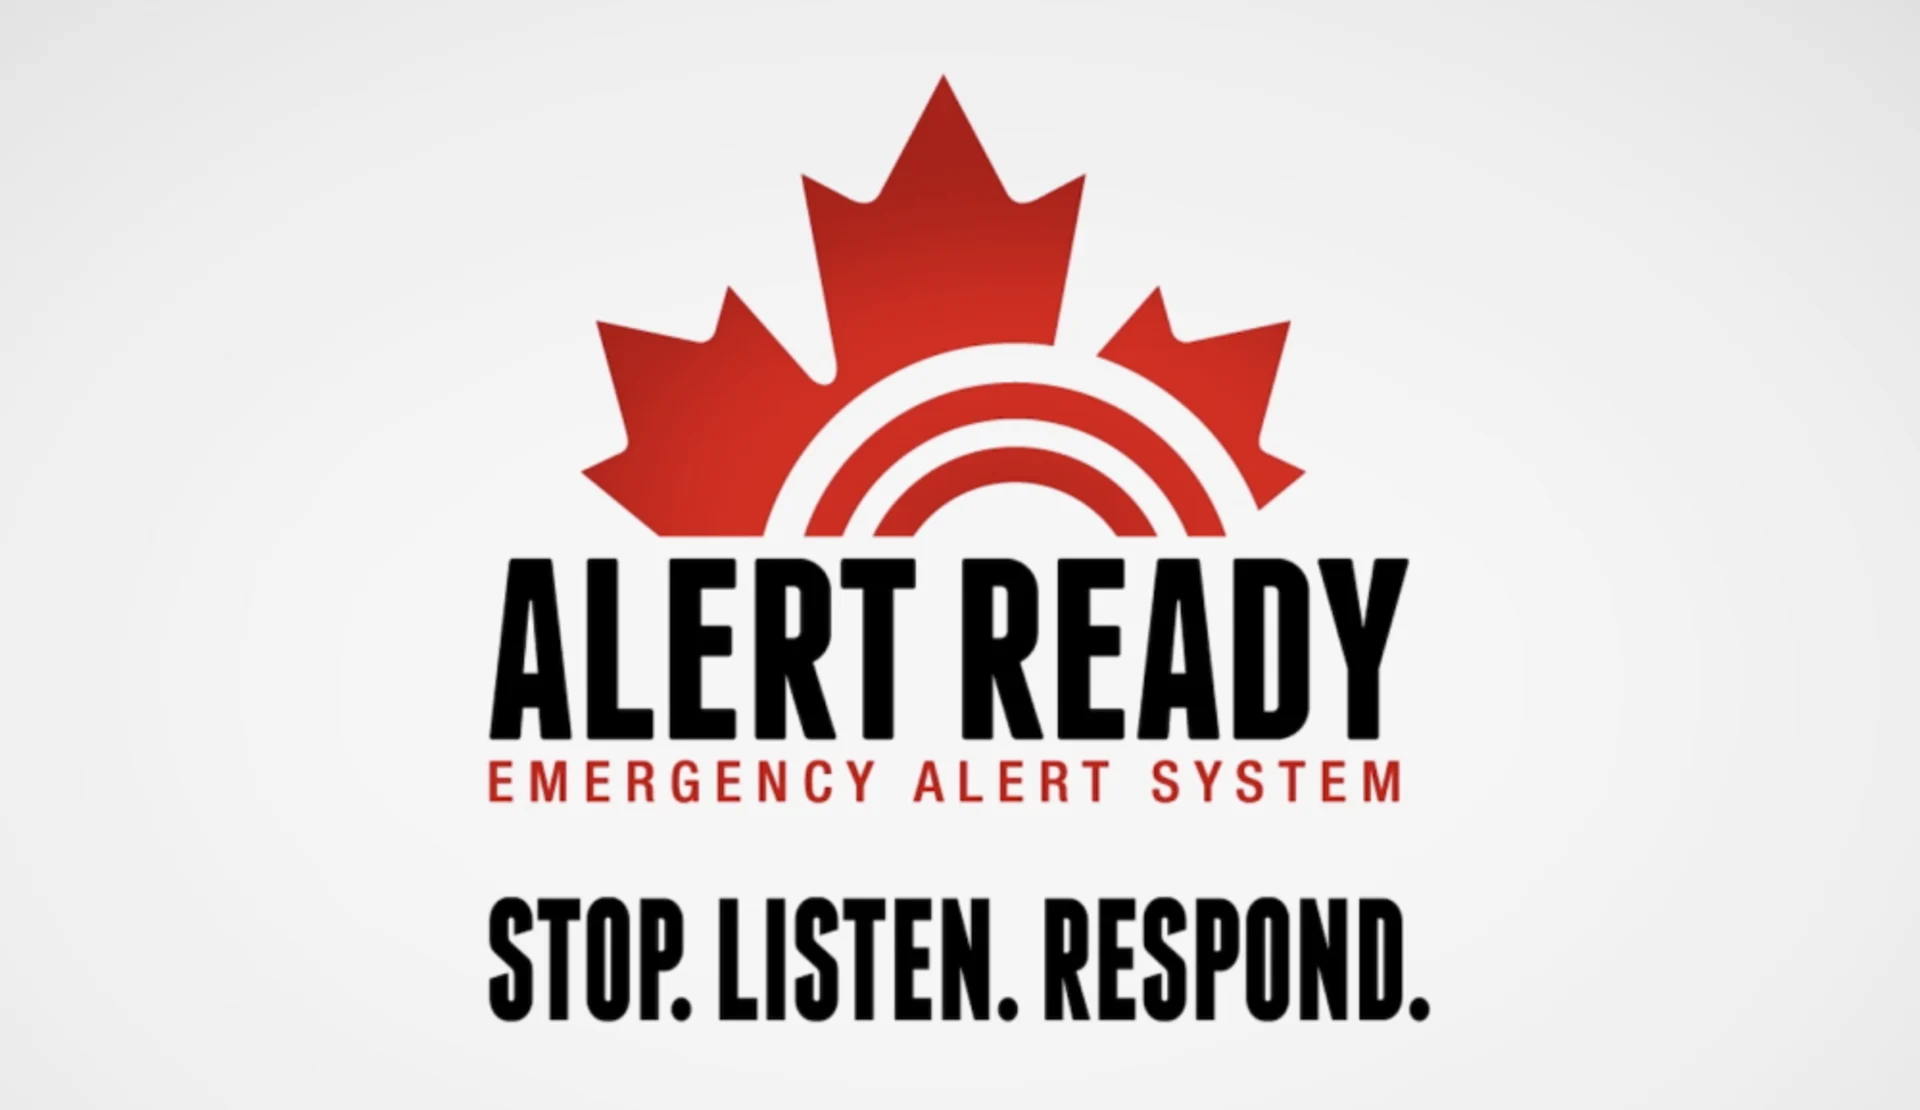 Did you receive a TEST emergency alert? No need to call 9-1-1 about this. Here's why it was issued